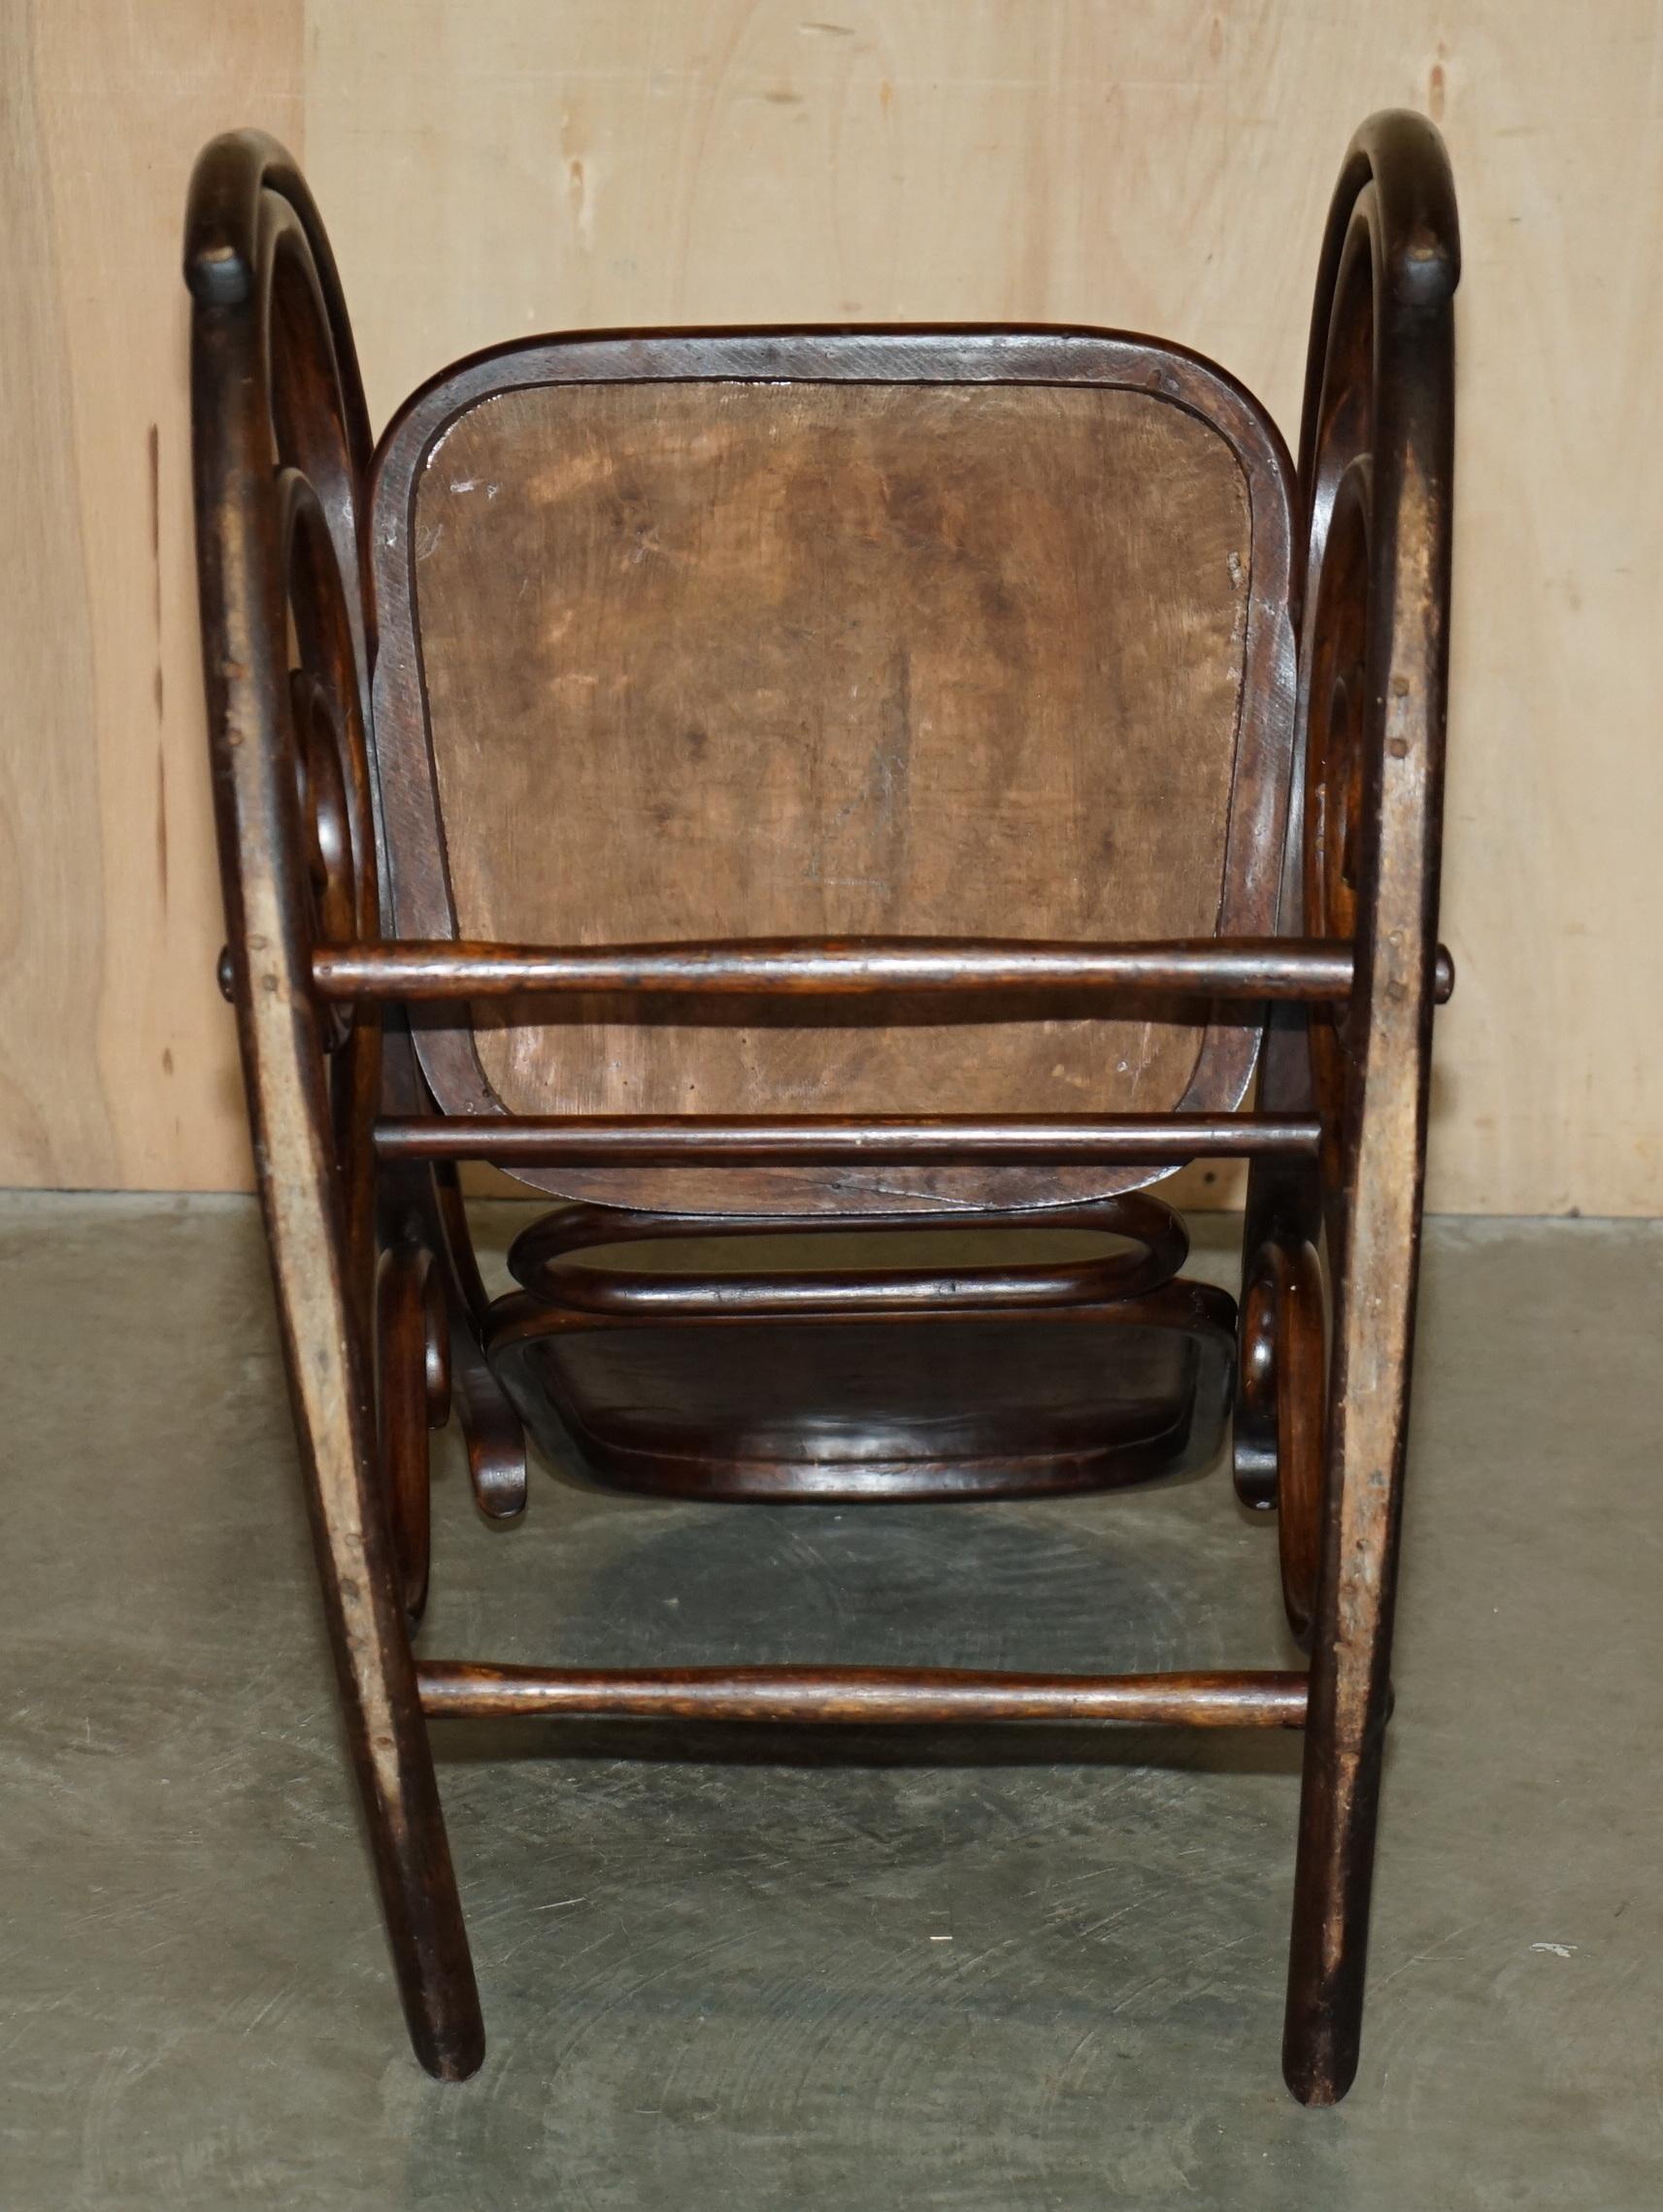 EXQUISITE ViCTORIAN THONET ROCKING CHAIR WITH CHERUB CARVED BACK & SEAT PANELS For Sale 11